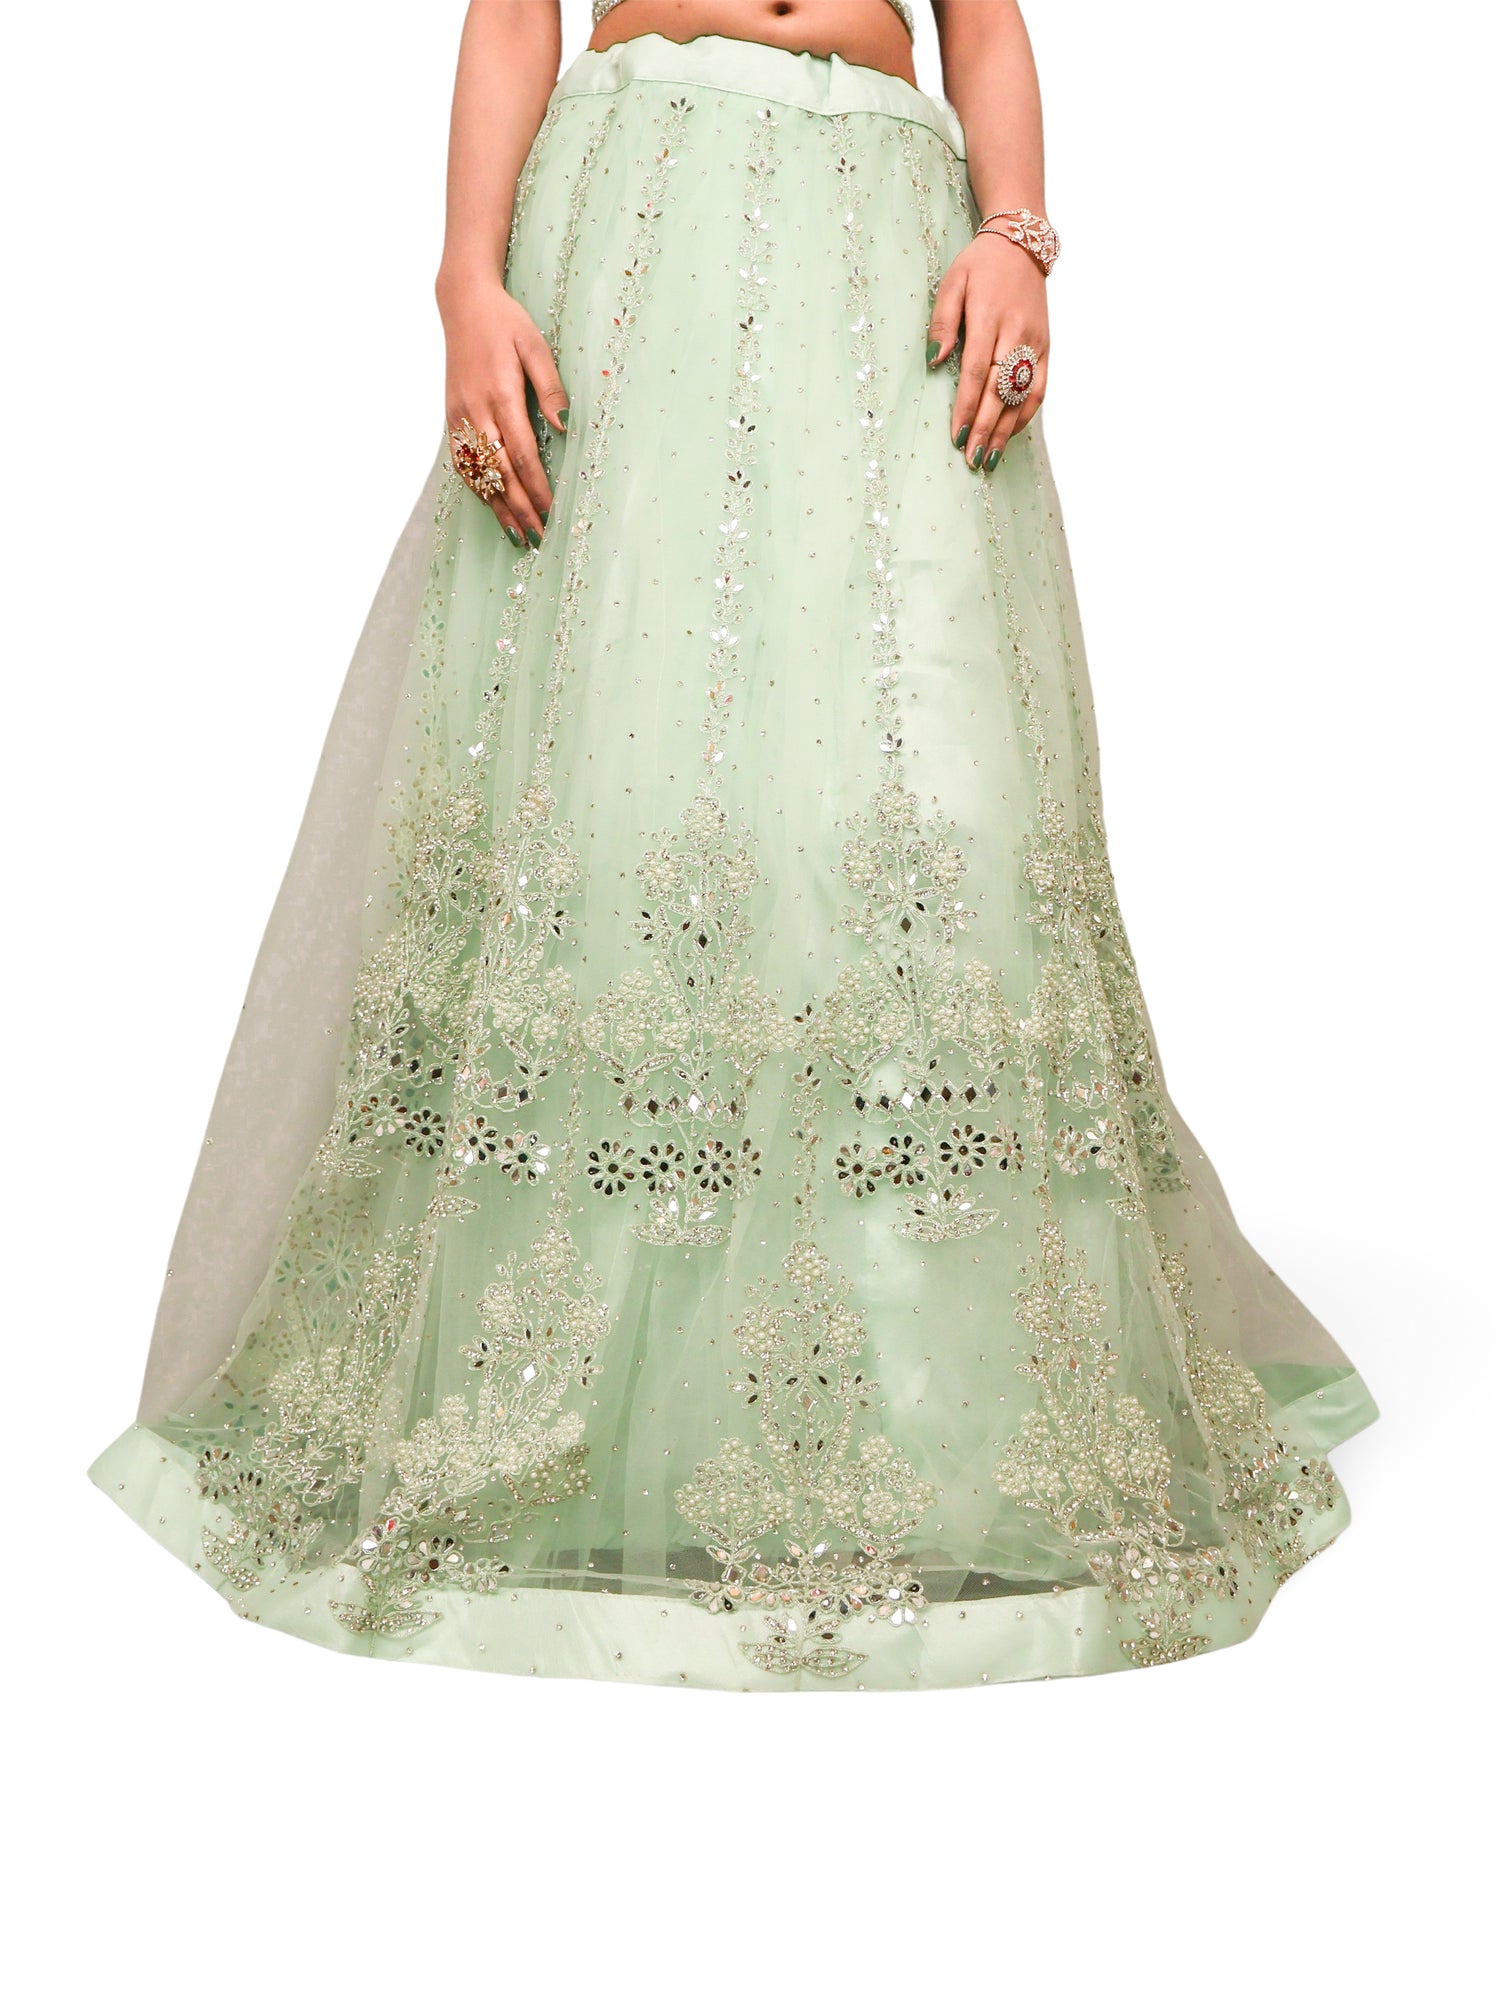 Designer Lehenga Choli with Embroidery and Mirror Peal Work by Shreekama Pista Green Designer Lehenga for Party Festival Wedding Occasion in Noida